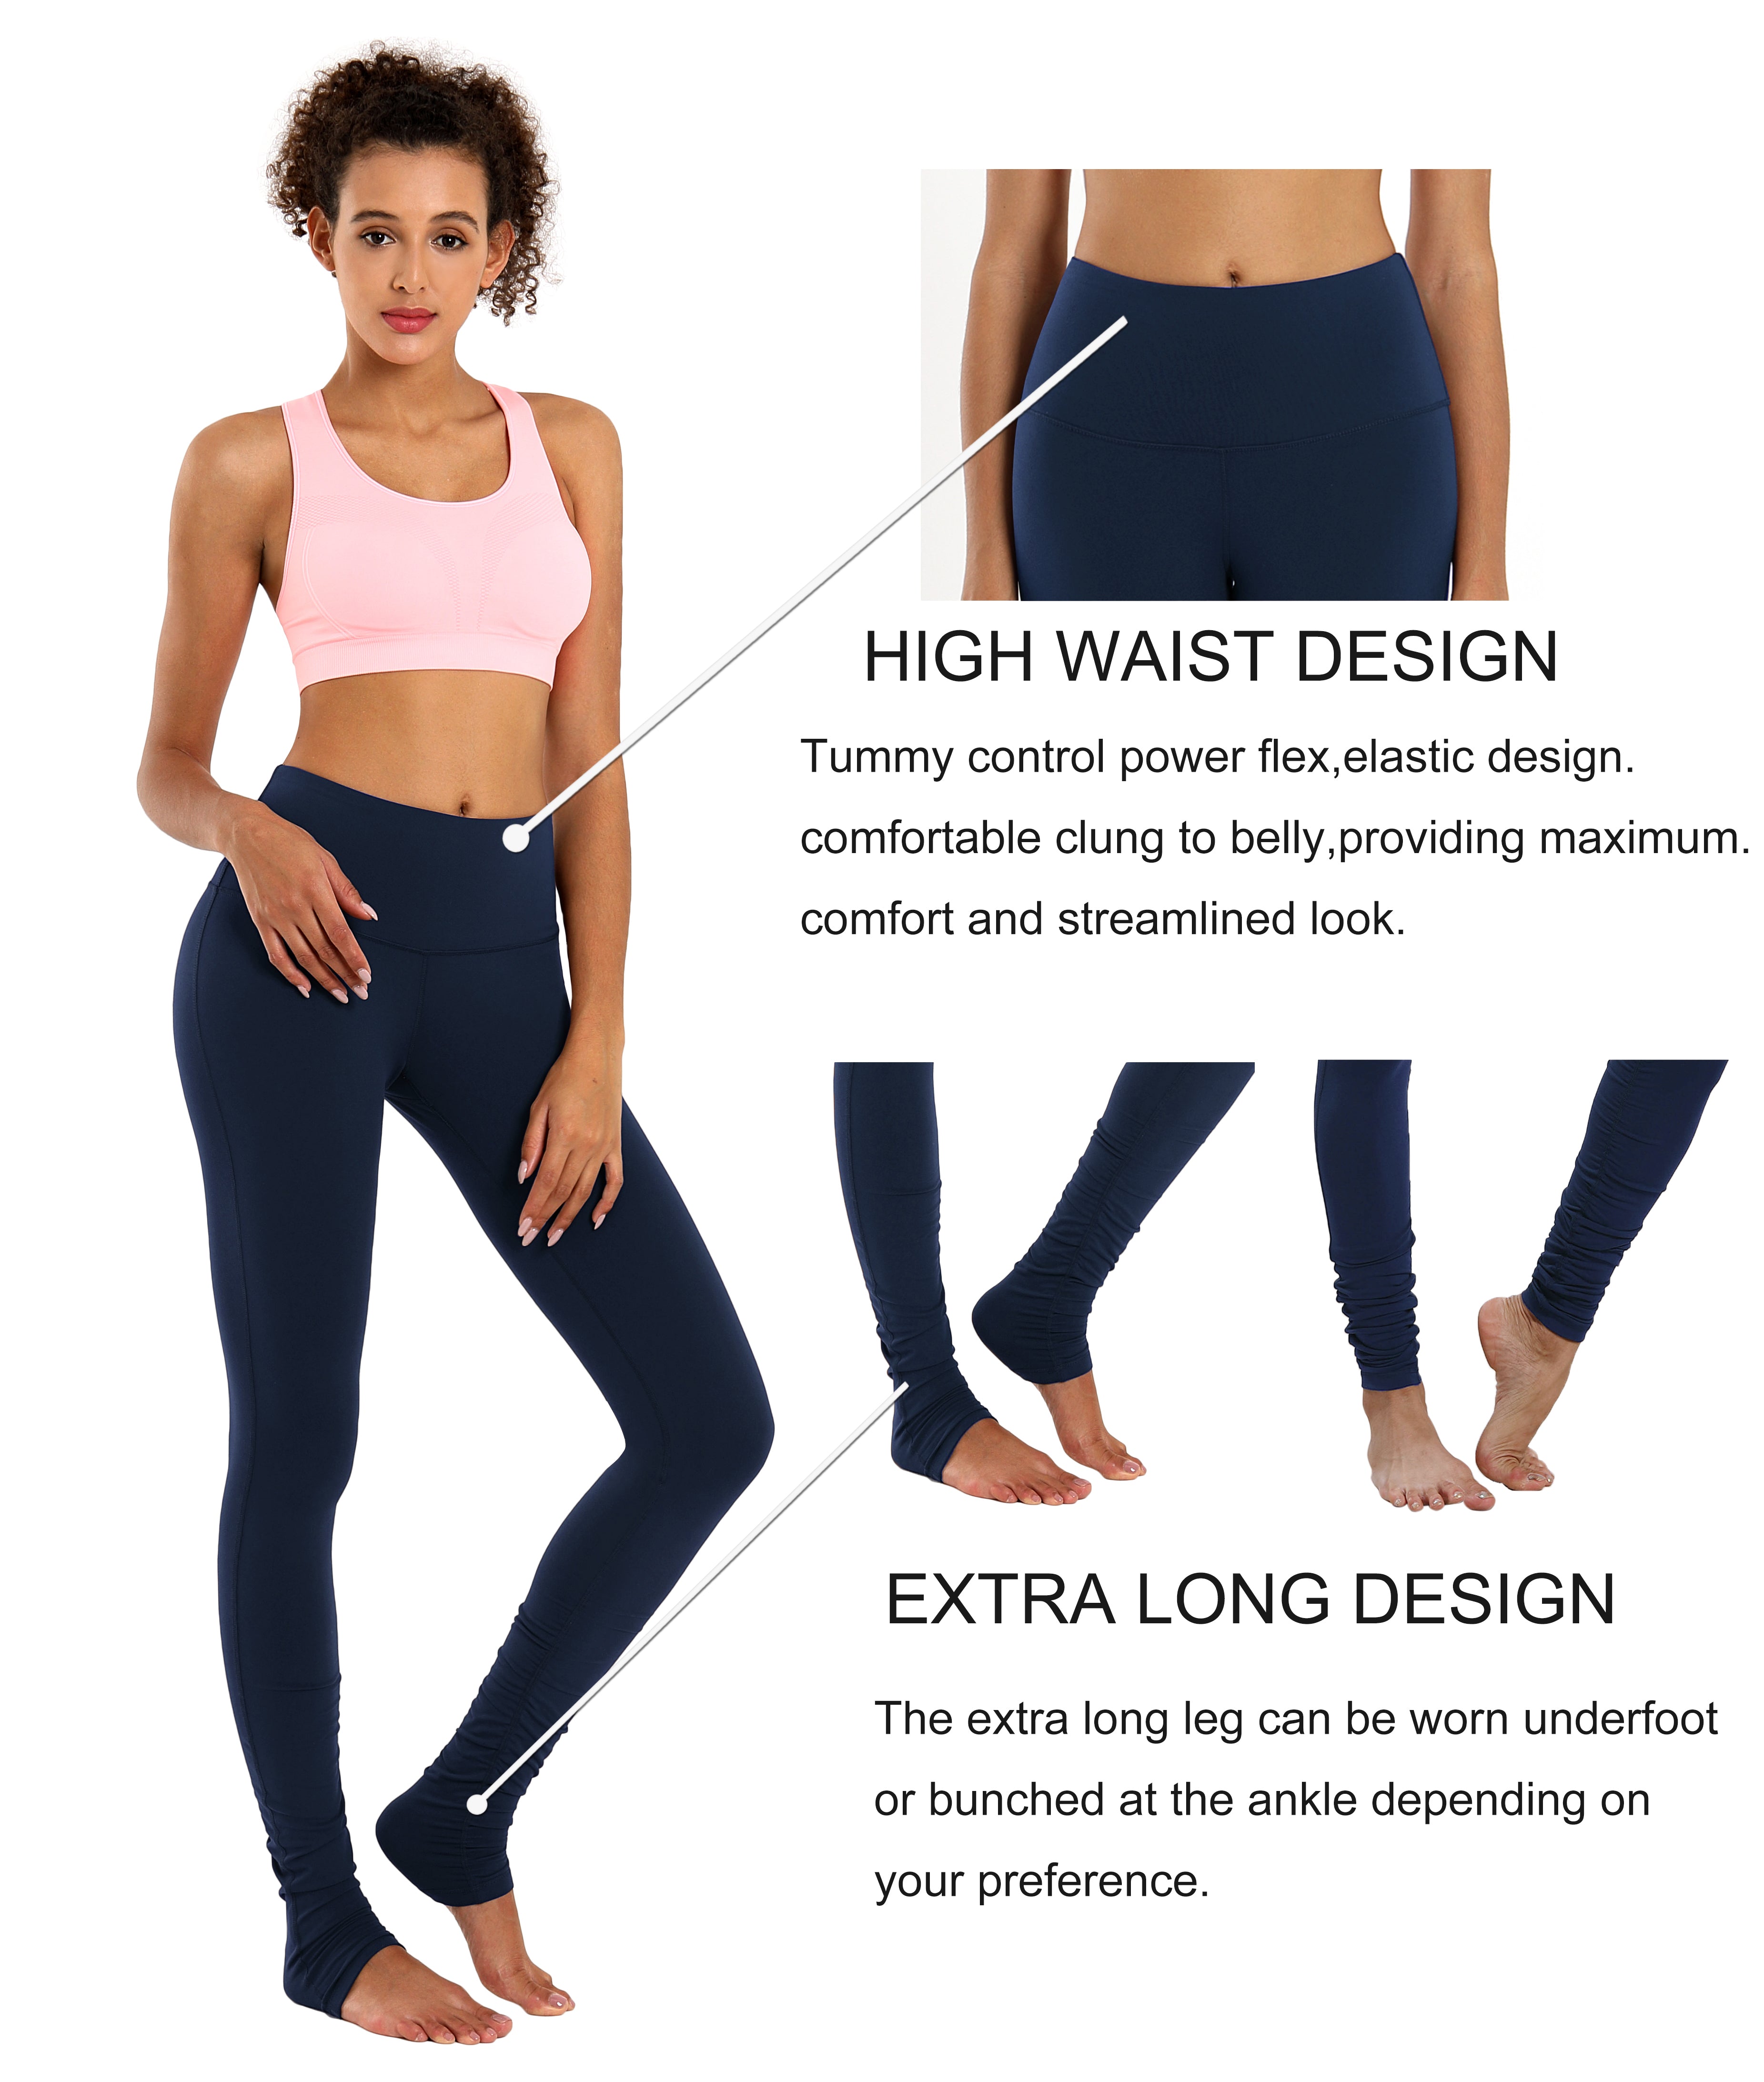 Over the Heel Yoga Pants darknavy Over the Heel Design 87%Nylon/13%Spandex Fabric doesn't attract lint easily 4-way stretch No see-through Moisture-wicking Tummy control